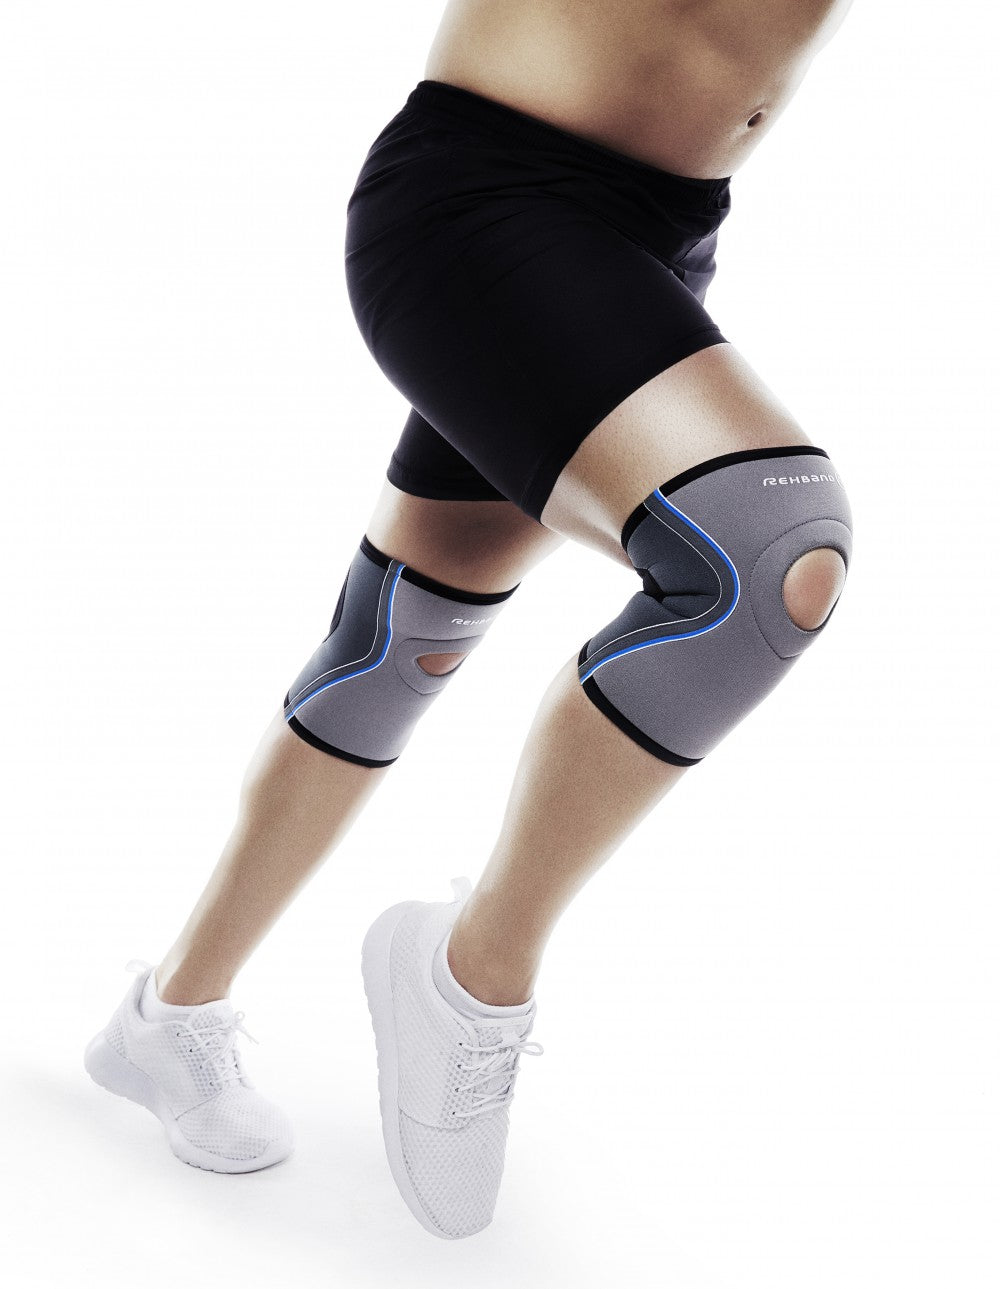 Knee support with patellar opening - XL